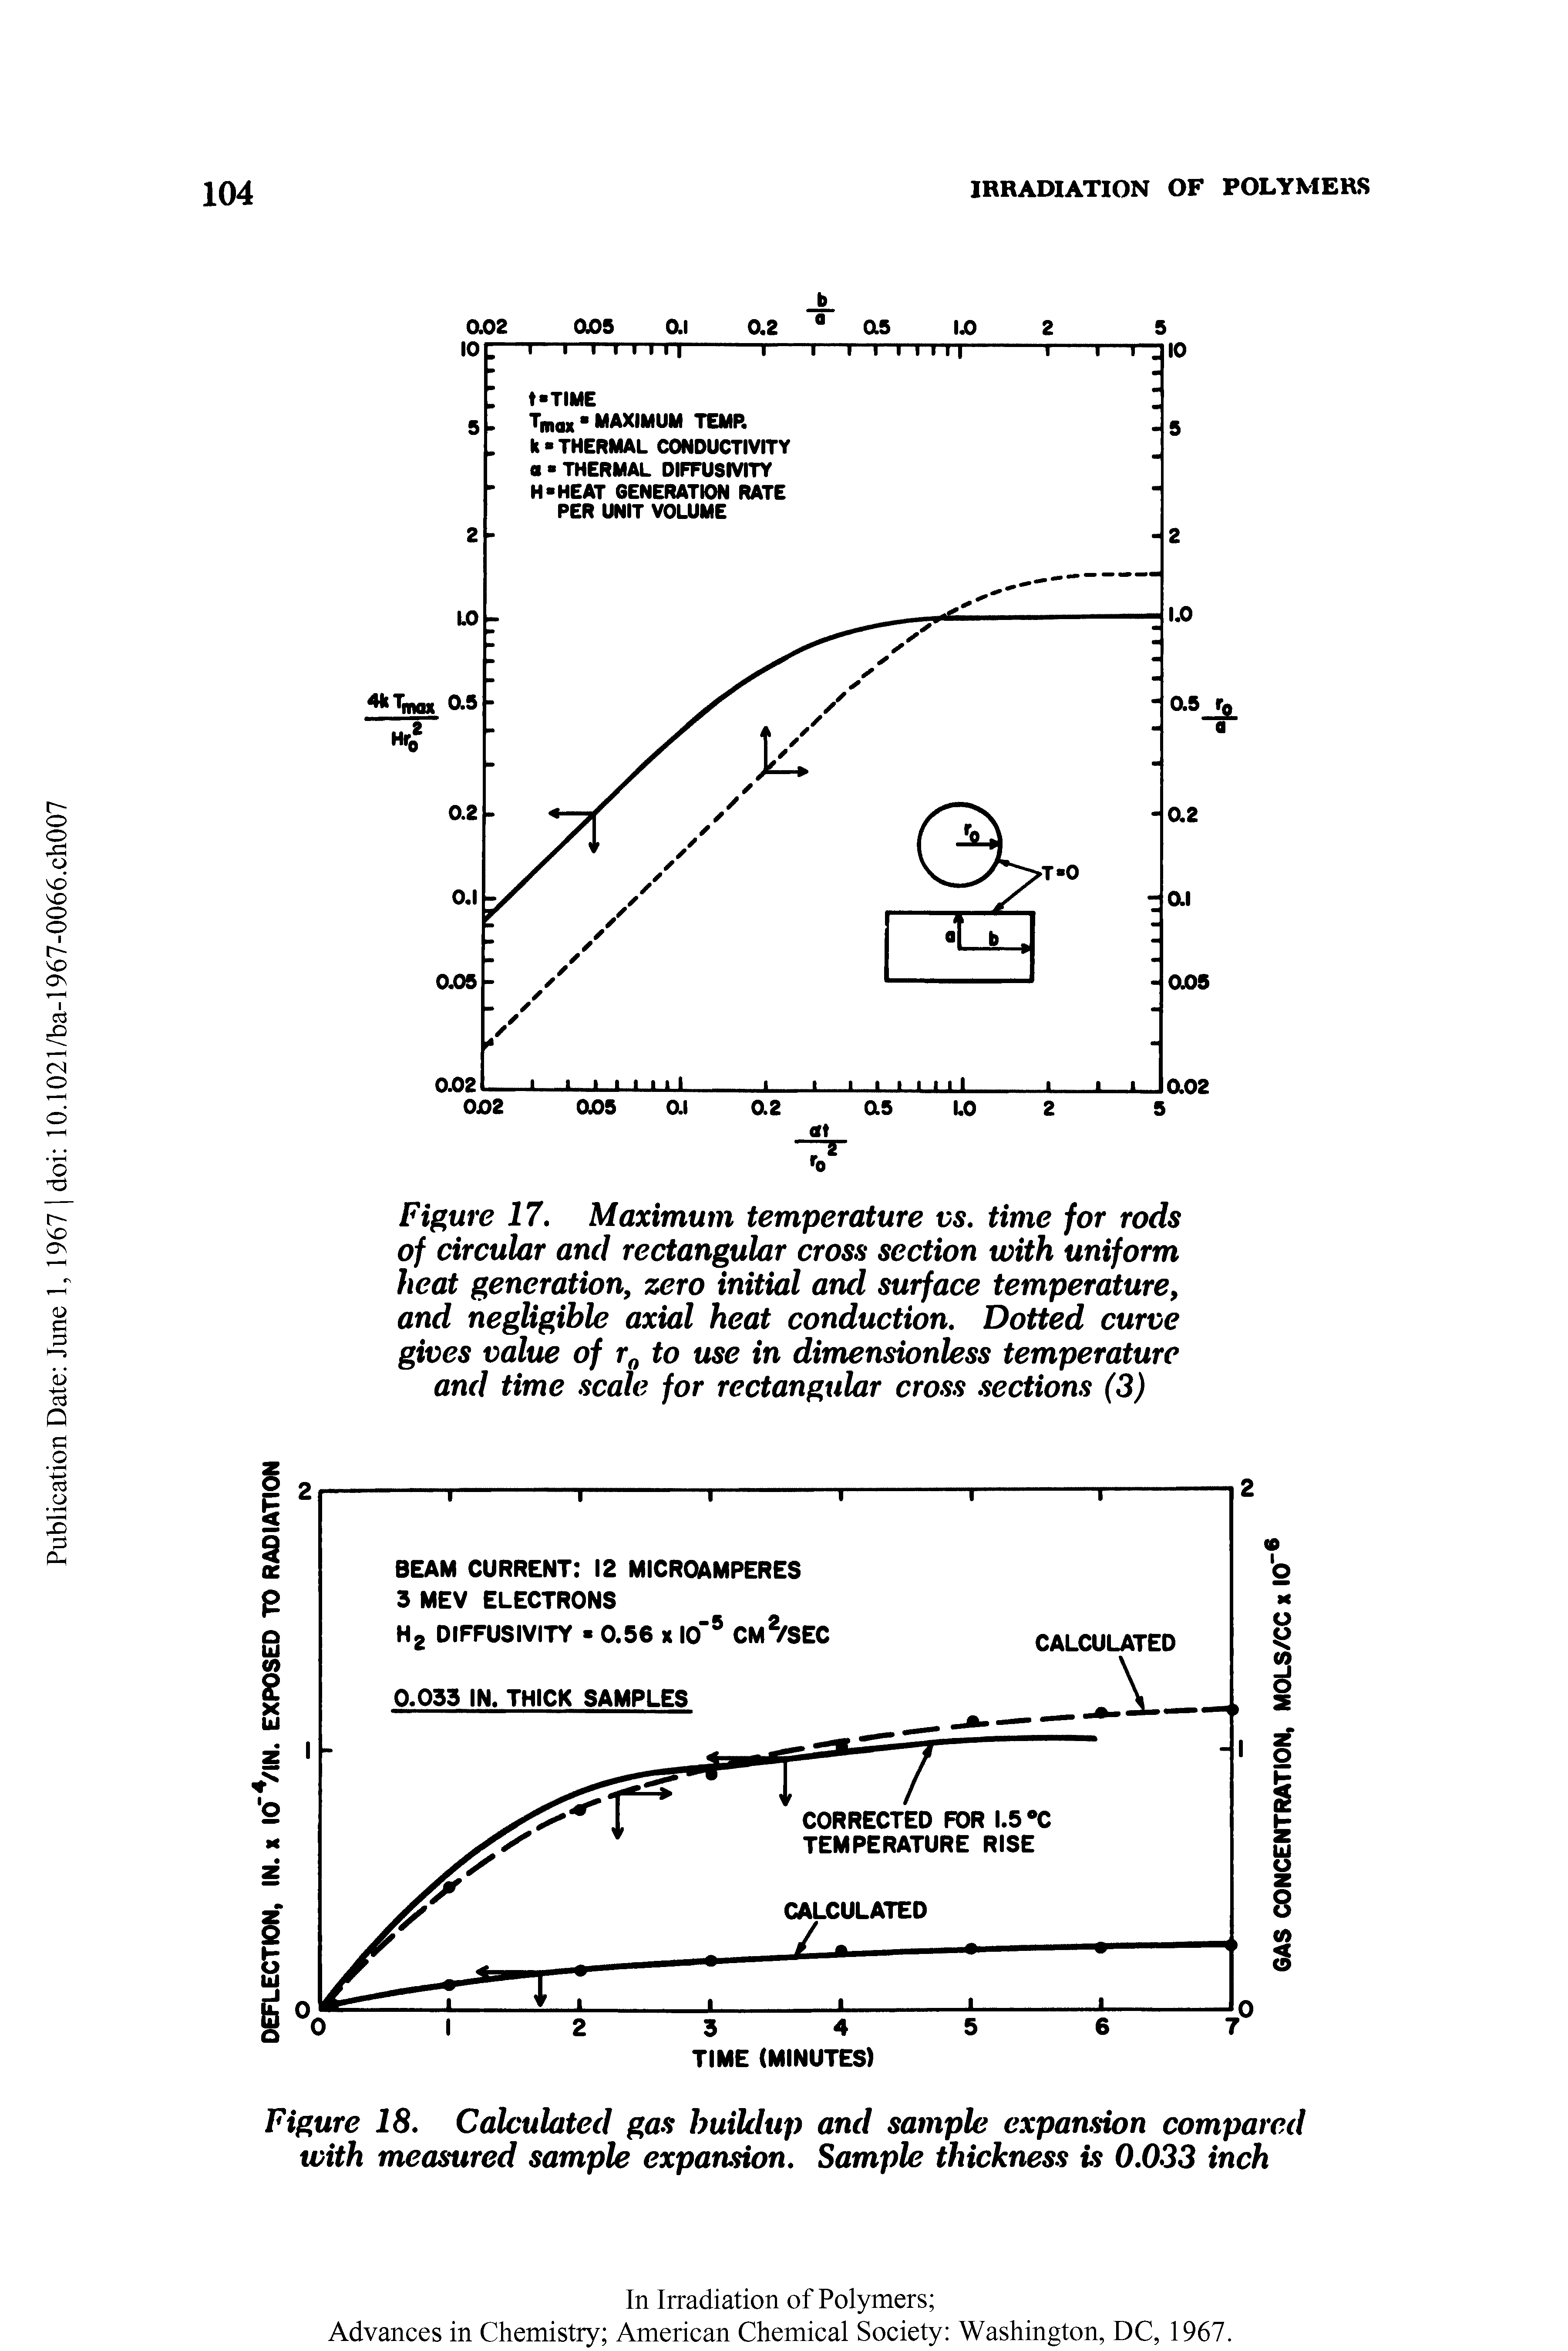 Figure 17. Maximum temperature vs. time for rods of circular and rectangular cross section with uniform heat generation, zero initial and surface temperature, and negligible axial heat conduction. Dotted curve gives value of r0 to use in dimensionless temperature and time scale for rectangular cross sections (3)...